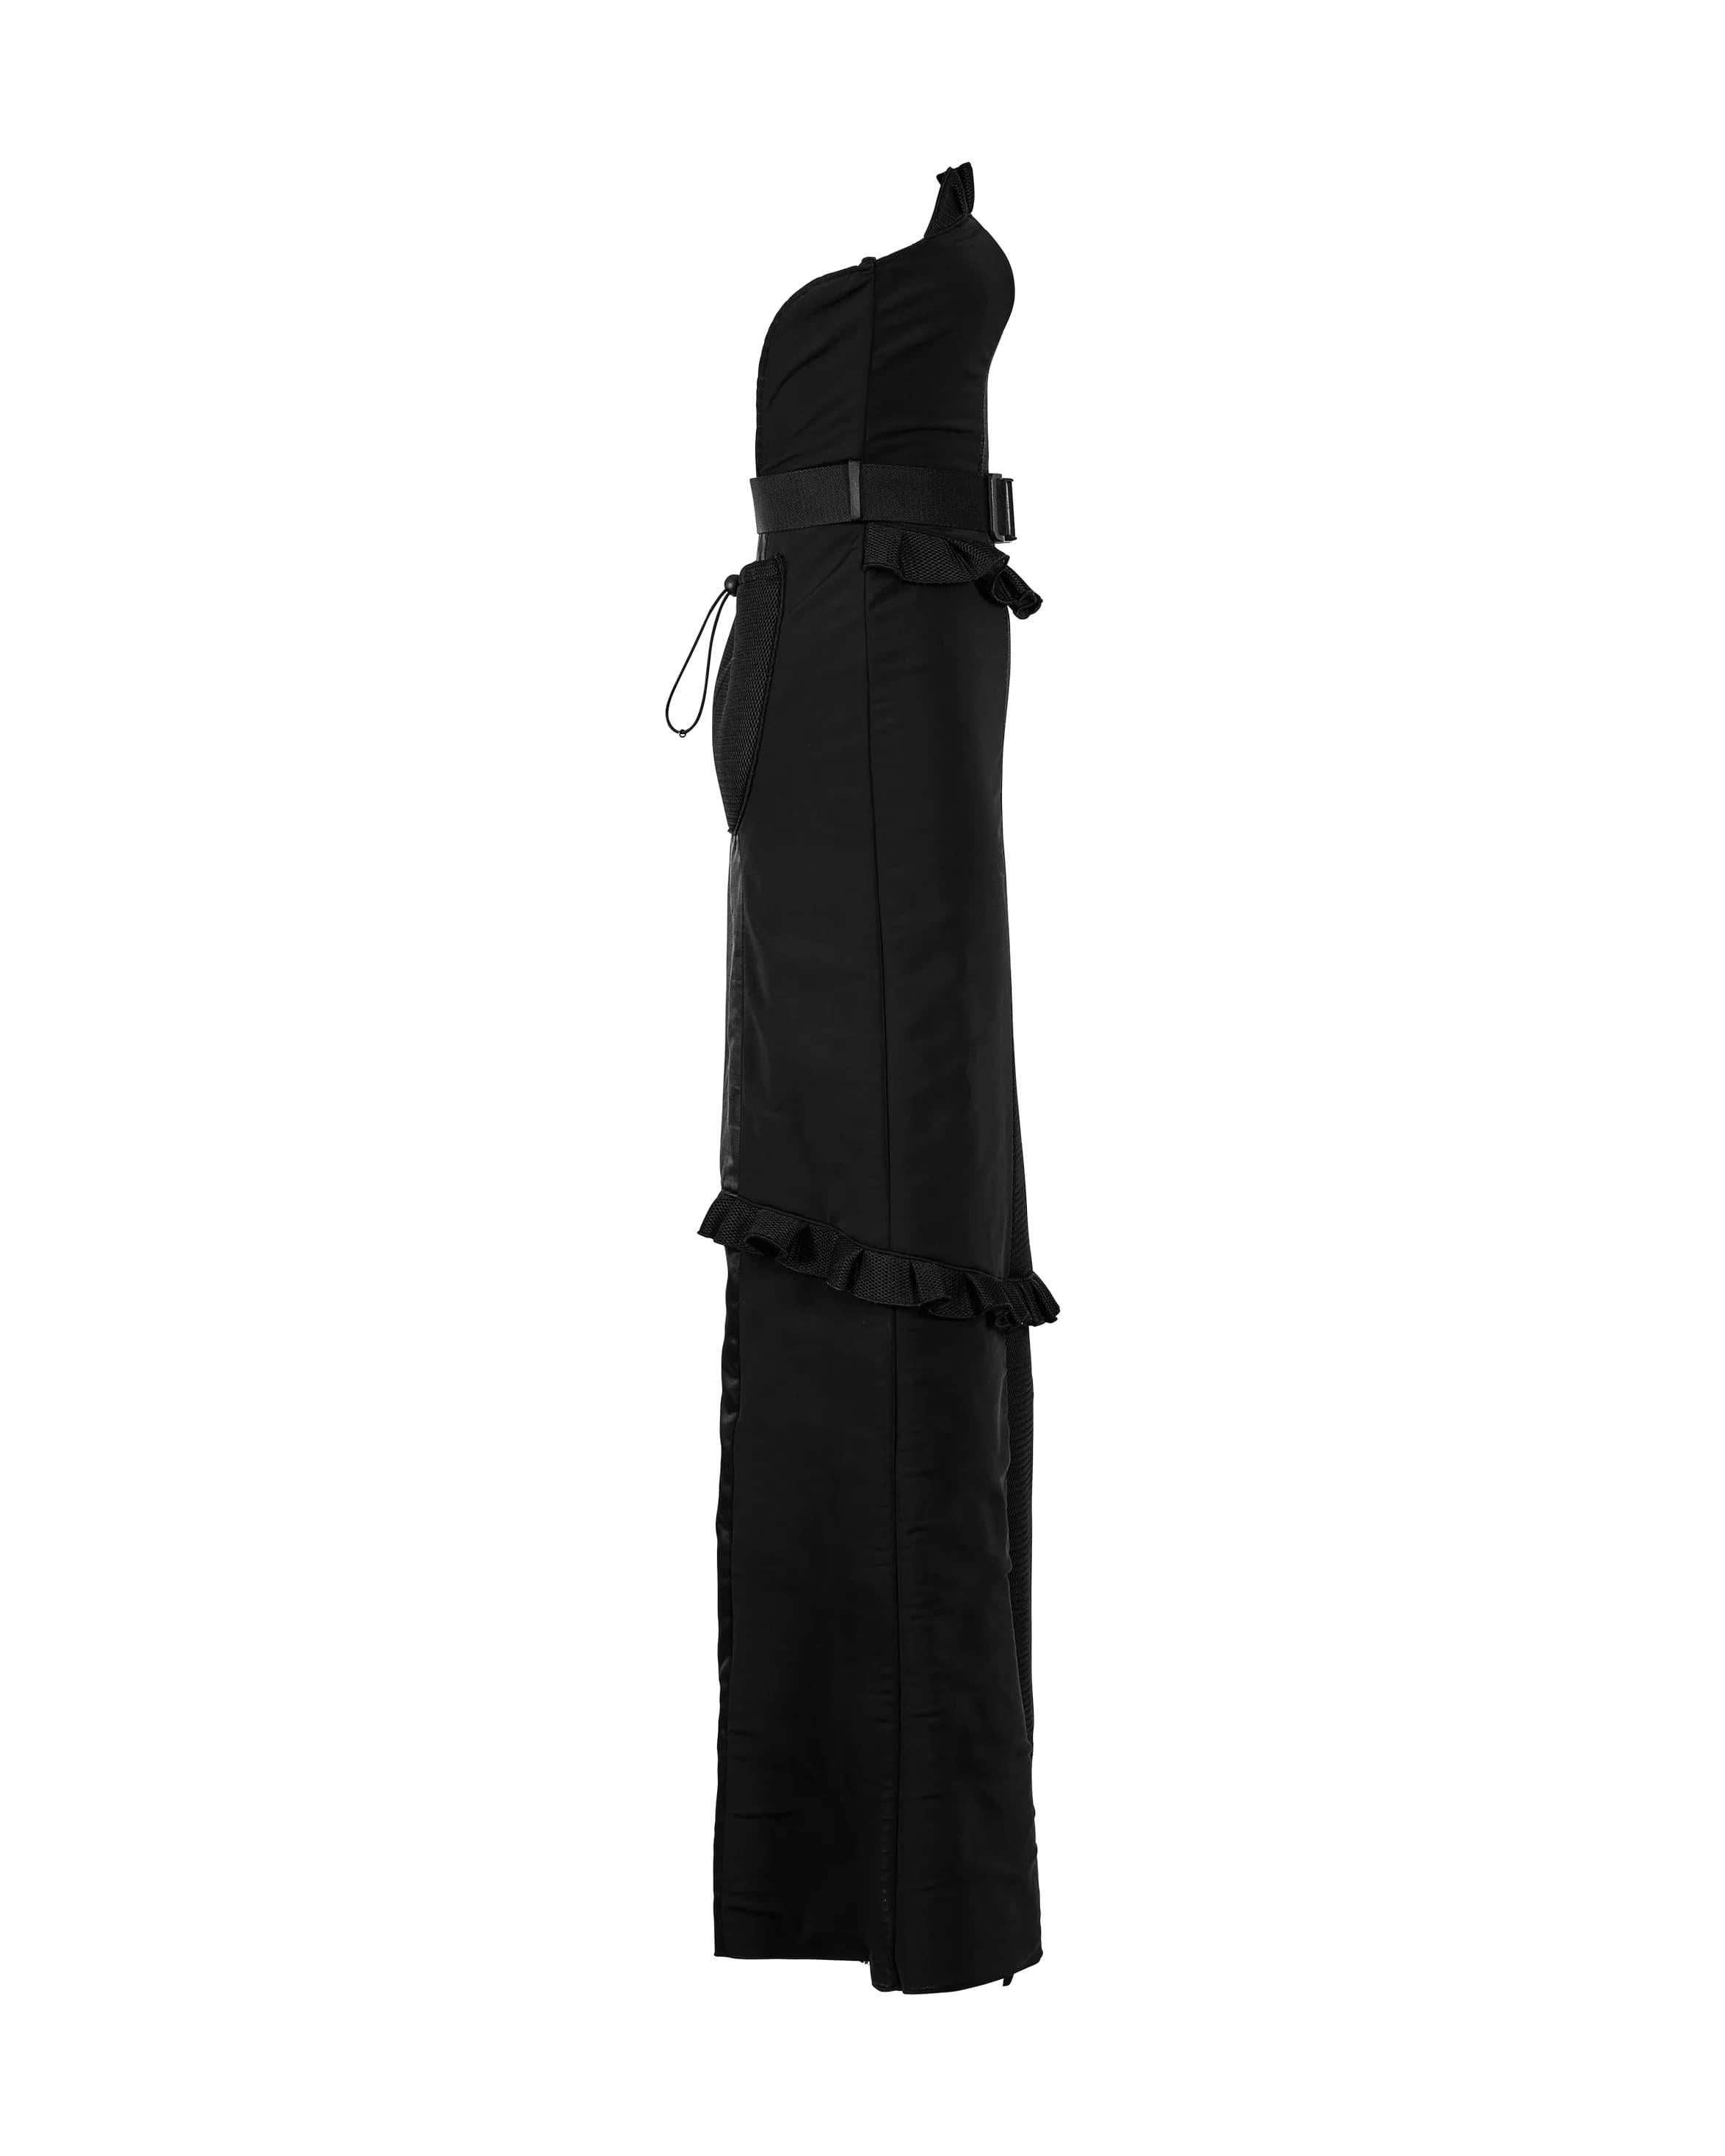 A/W 1999 Miu Miu by Miuccia Prada utility-inspired black strapless nylon and neoprene mesh dress with adjustable seatbelt buckle accent. Showstopping nylon dress with mesh paneling throughout, including intricate mesh ruffle bust and hip detailing,